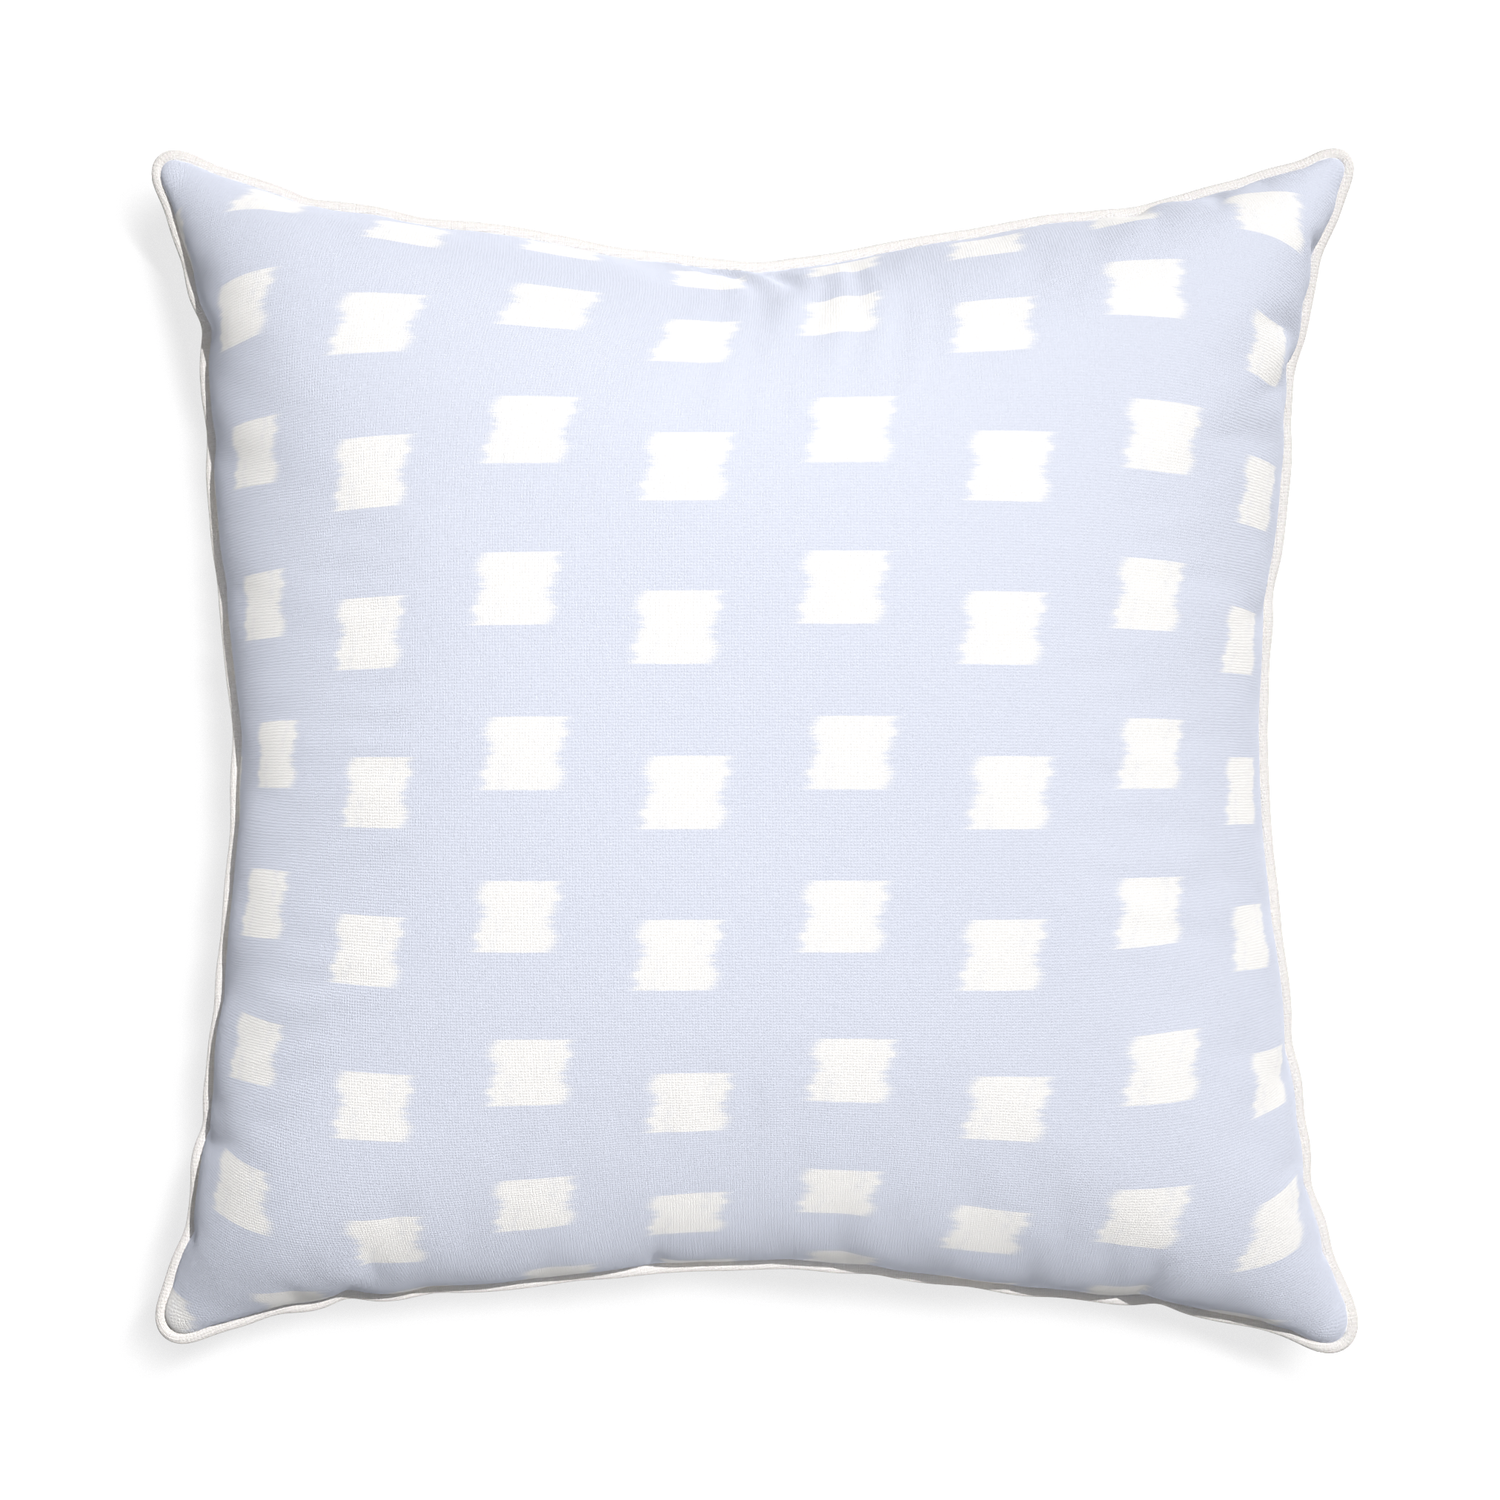 Euro-sham denton custom sky blue patternpillow with snow piping on white background